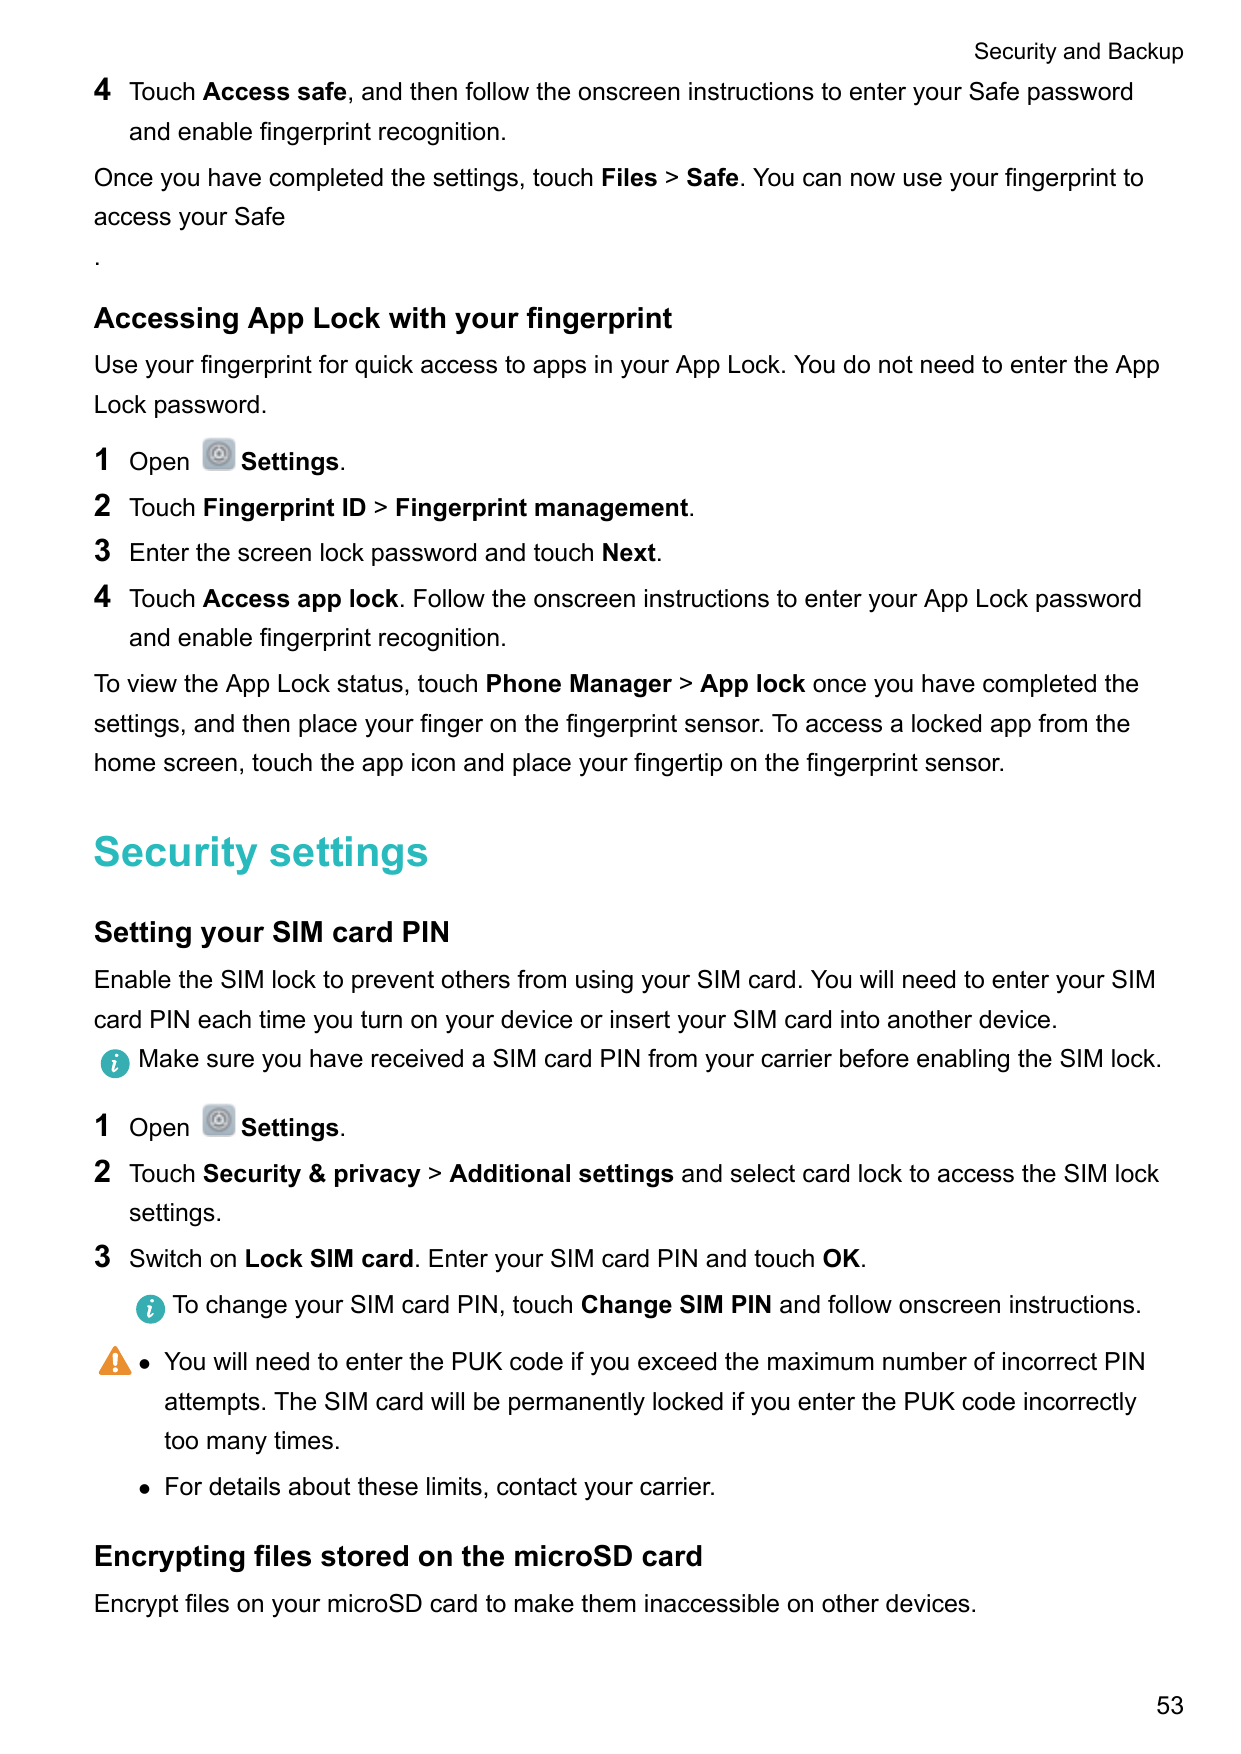 Security and Backup4Touch Access safe, and then follow the onscreen instructions to enter your Safe passwordand enable fingerpri